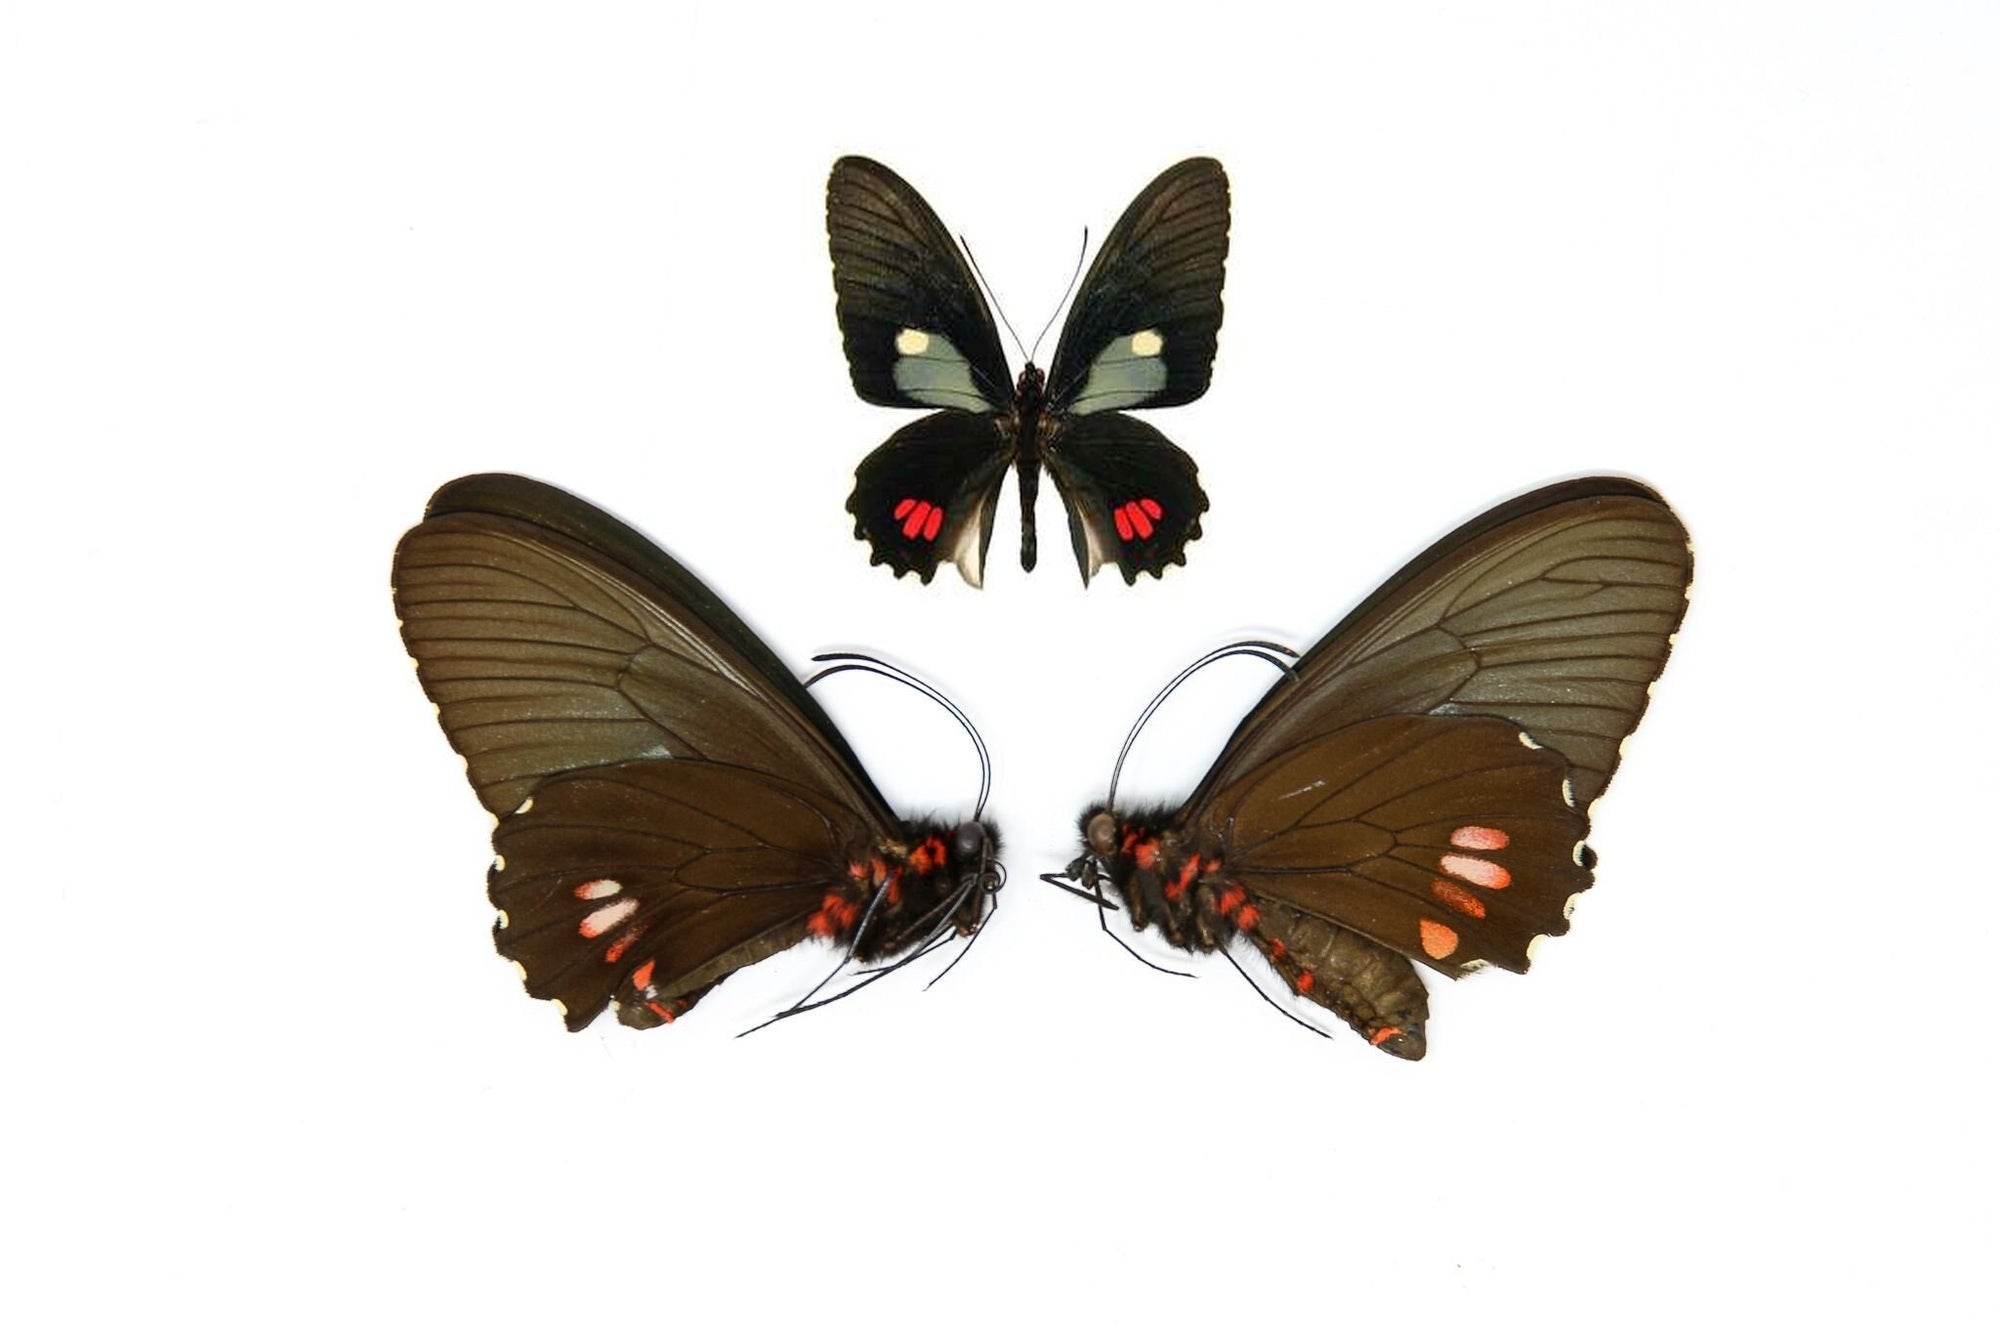 Two (2) Parides erithalion "Variable Cattleheart" A1 Real Dry-Preserved Butterflies, Unmounted Entomology Taxidermy Specimens